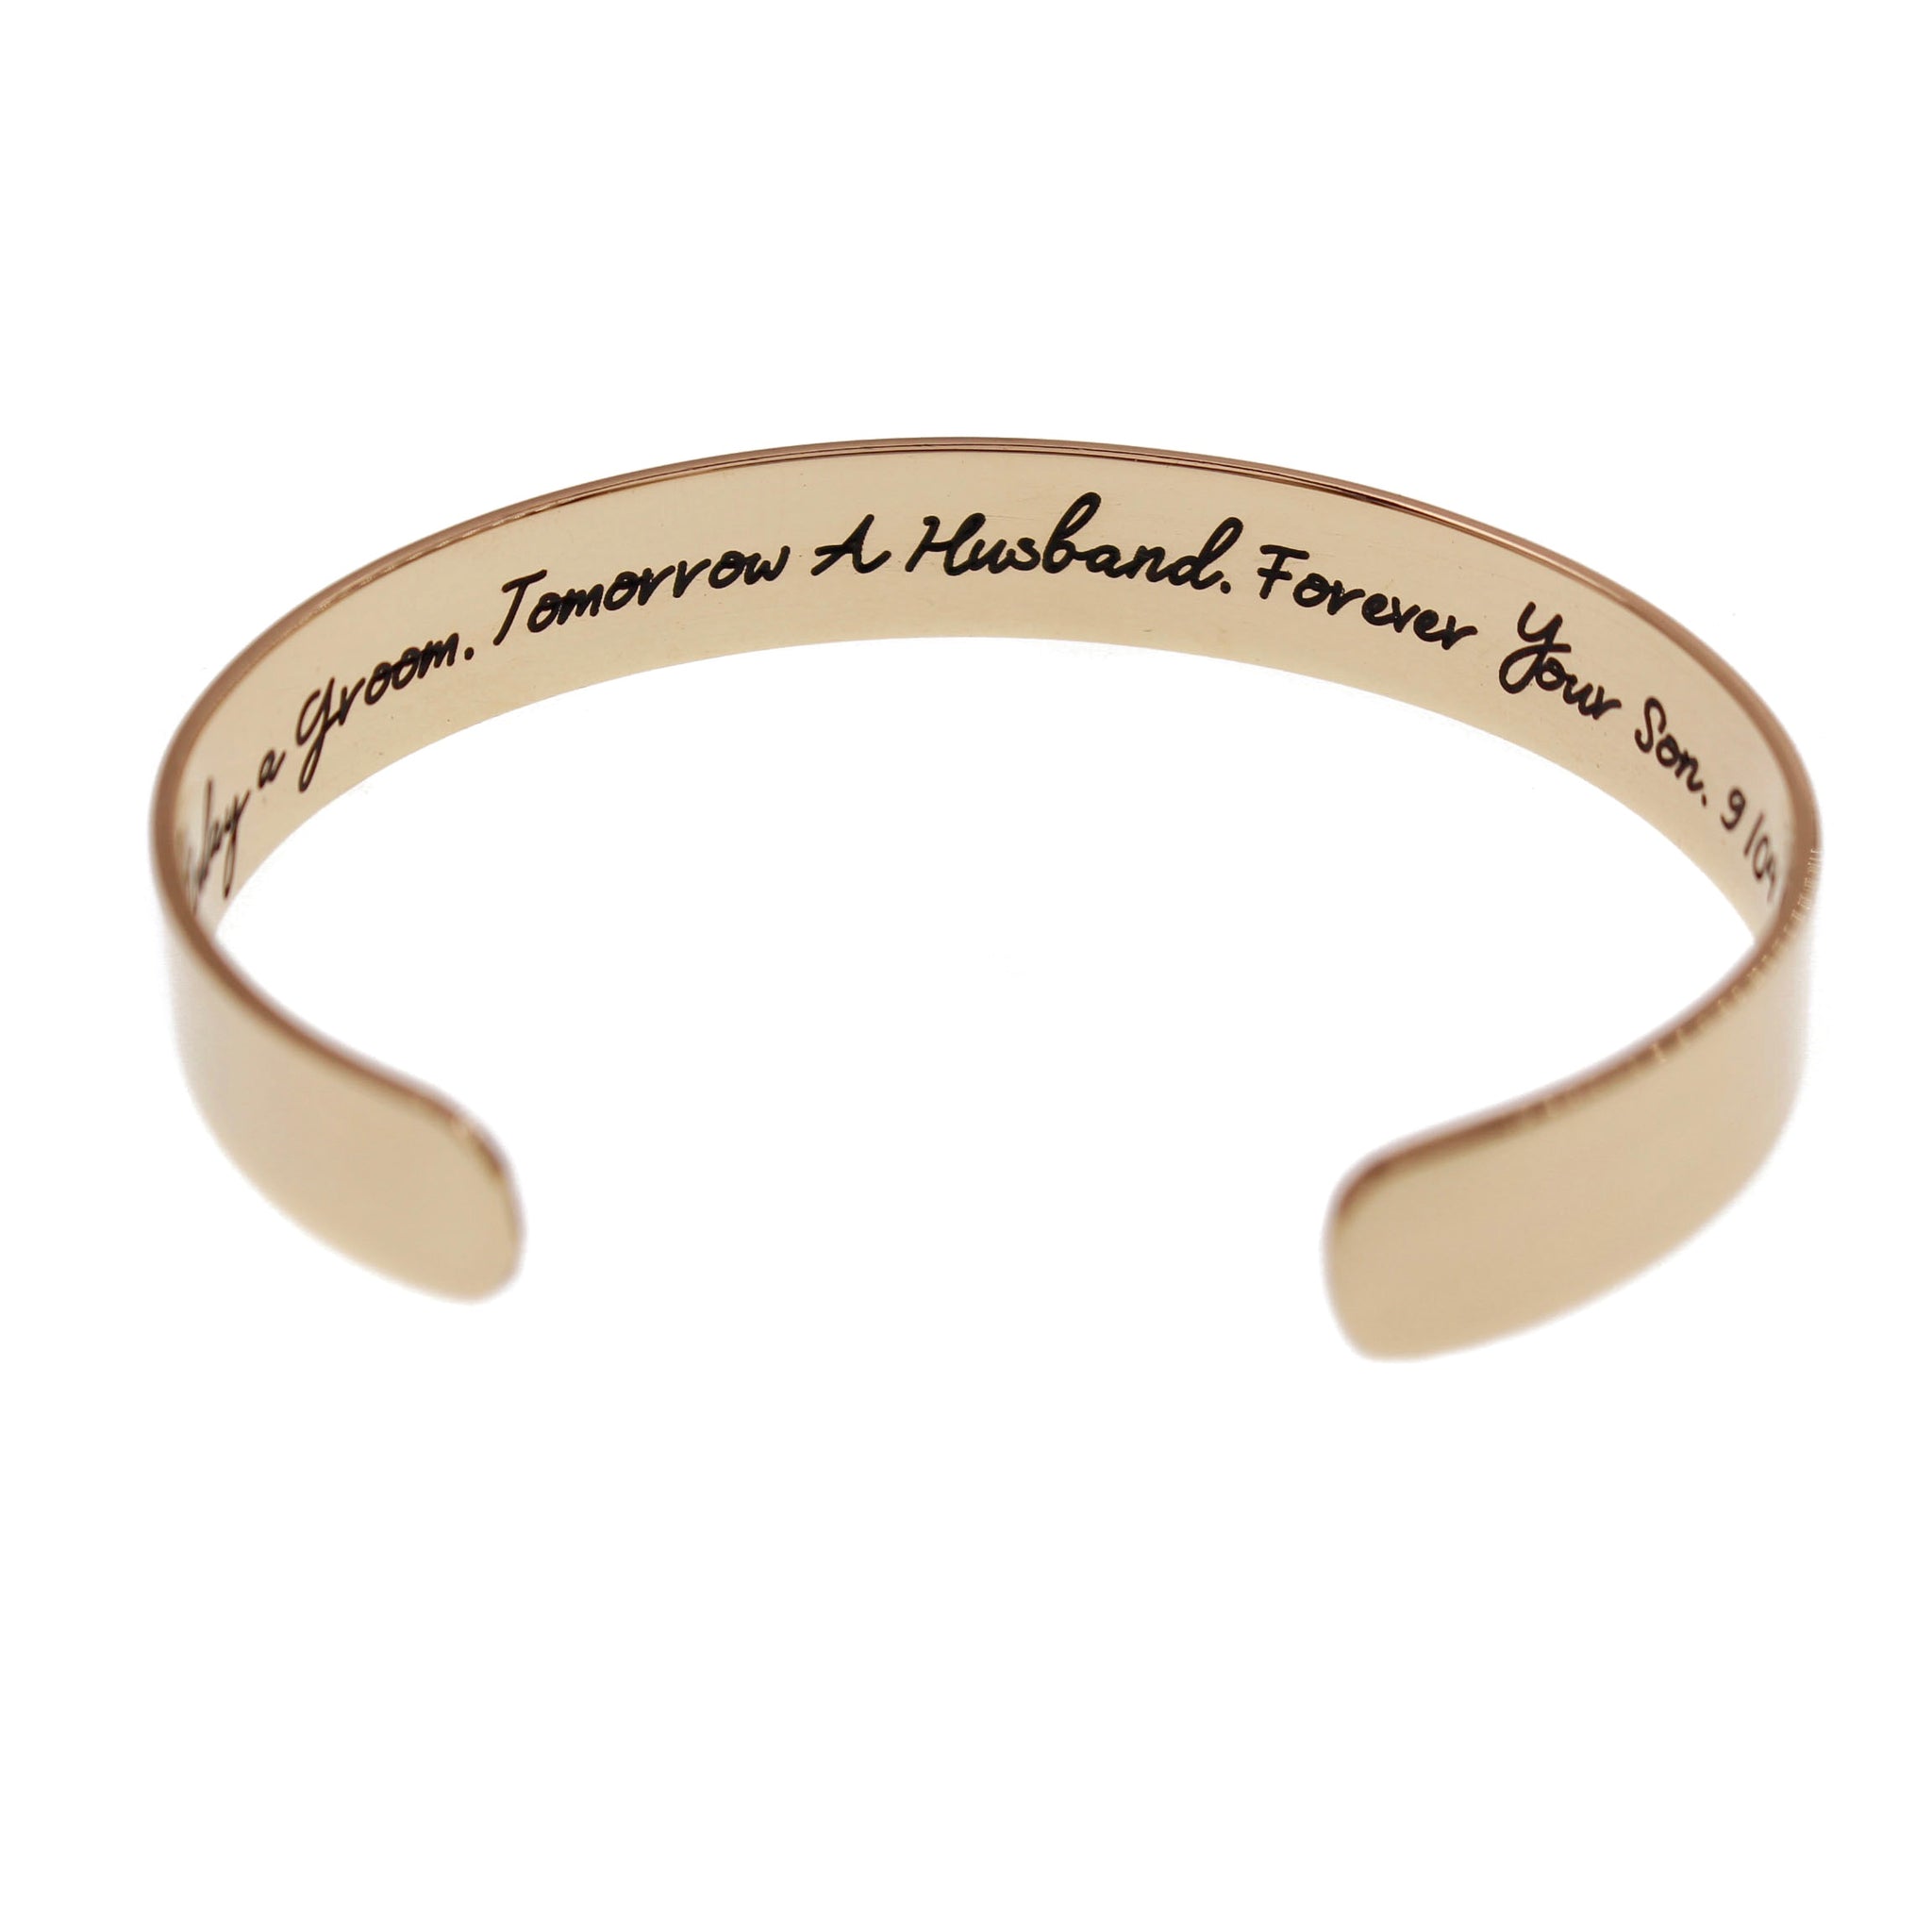 Buy Engraved Bracelets for Women Personalized Gift Summer Jewelry for Her Friendship  Bracelet Cuff Bangle Bracelet Bridesmaid Gifts Online in India - Etsy